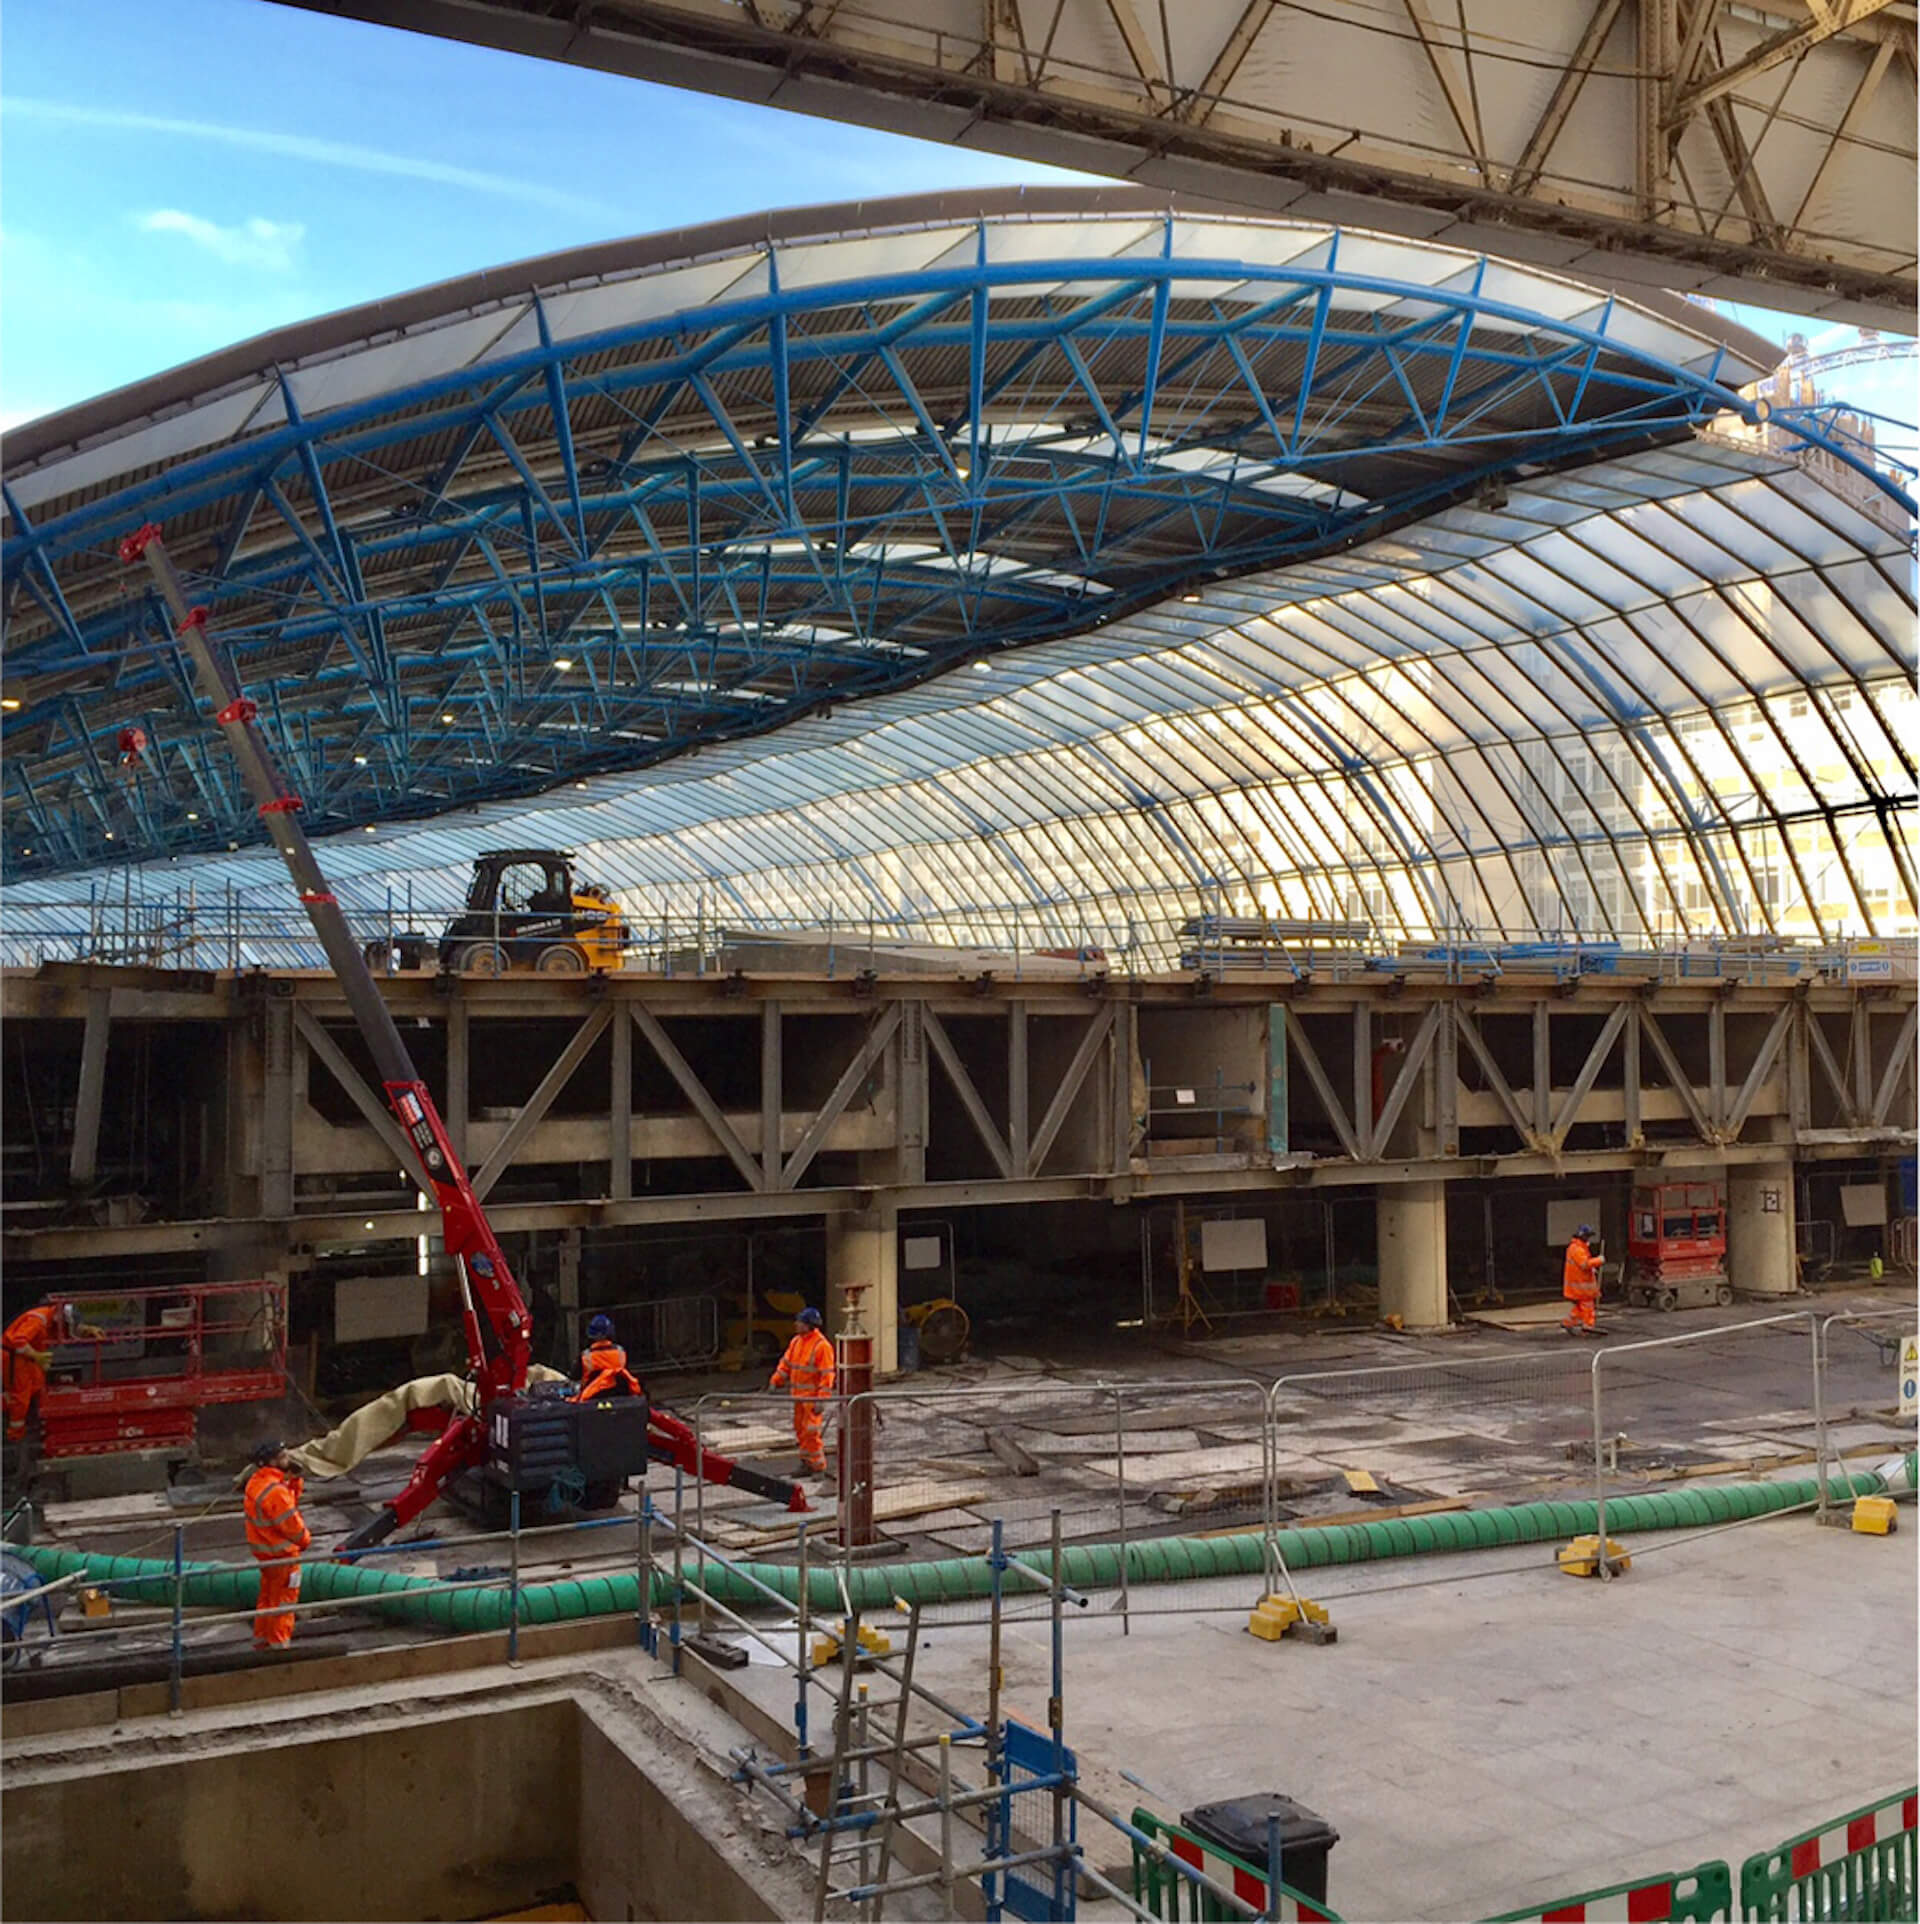 workers removing floor concrete with a machine under overhead roof canopy at Waterloo international train station. Another small machine is positioned on a floor level above in the background.